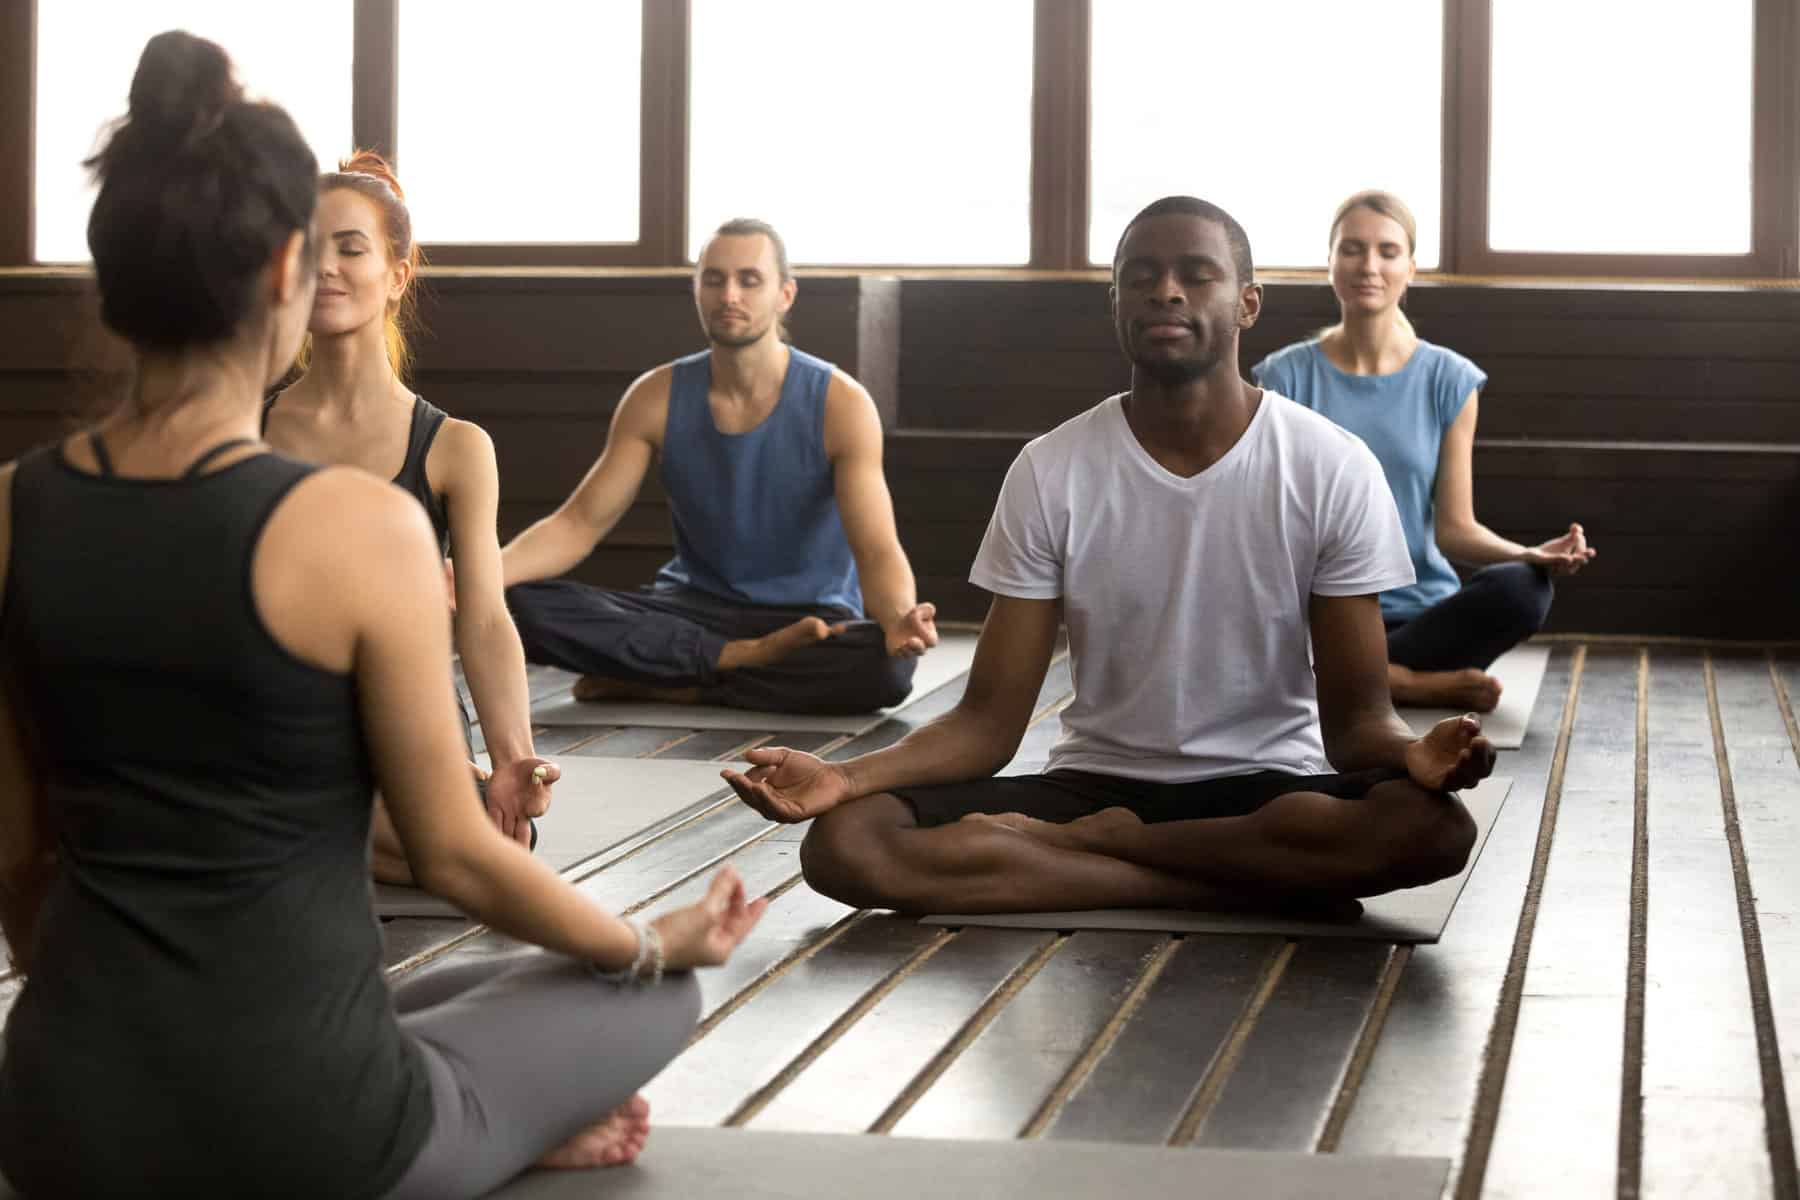 Yoga class practicing breathing and meditation. How to enhance mind-body wellness.